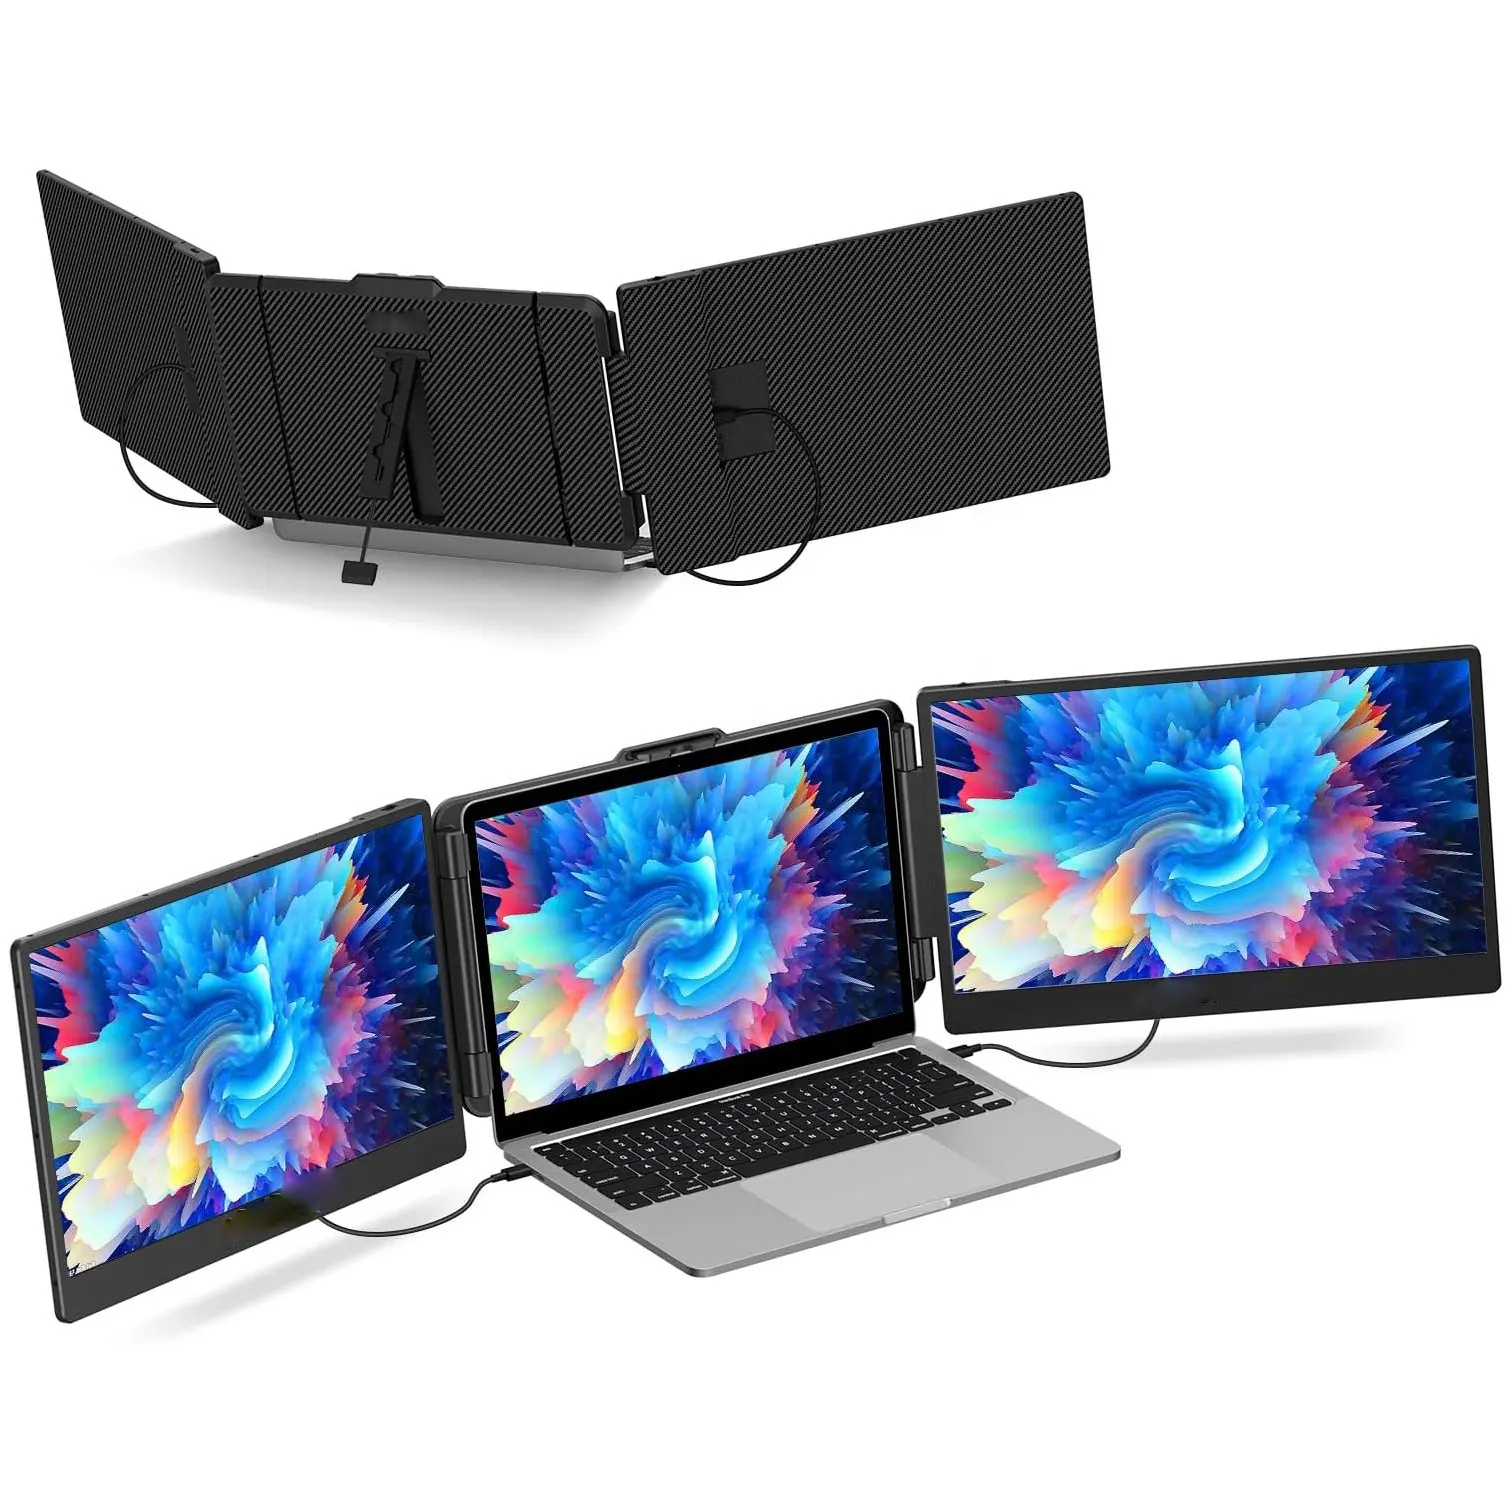 FHD 1080P IPS Display Plug & Play for Multiple Device Type-C HDMI Double Monitor Screen Extender Screen Extension for Laptop